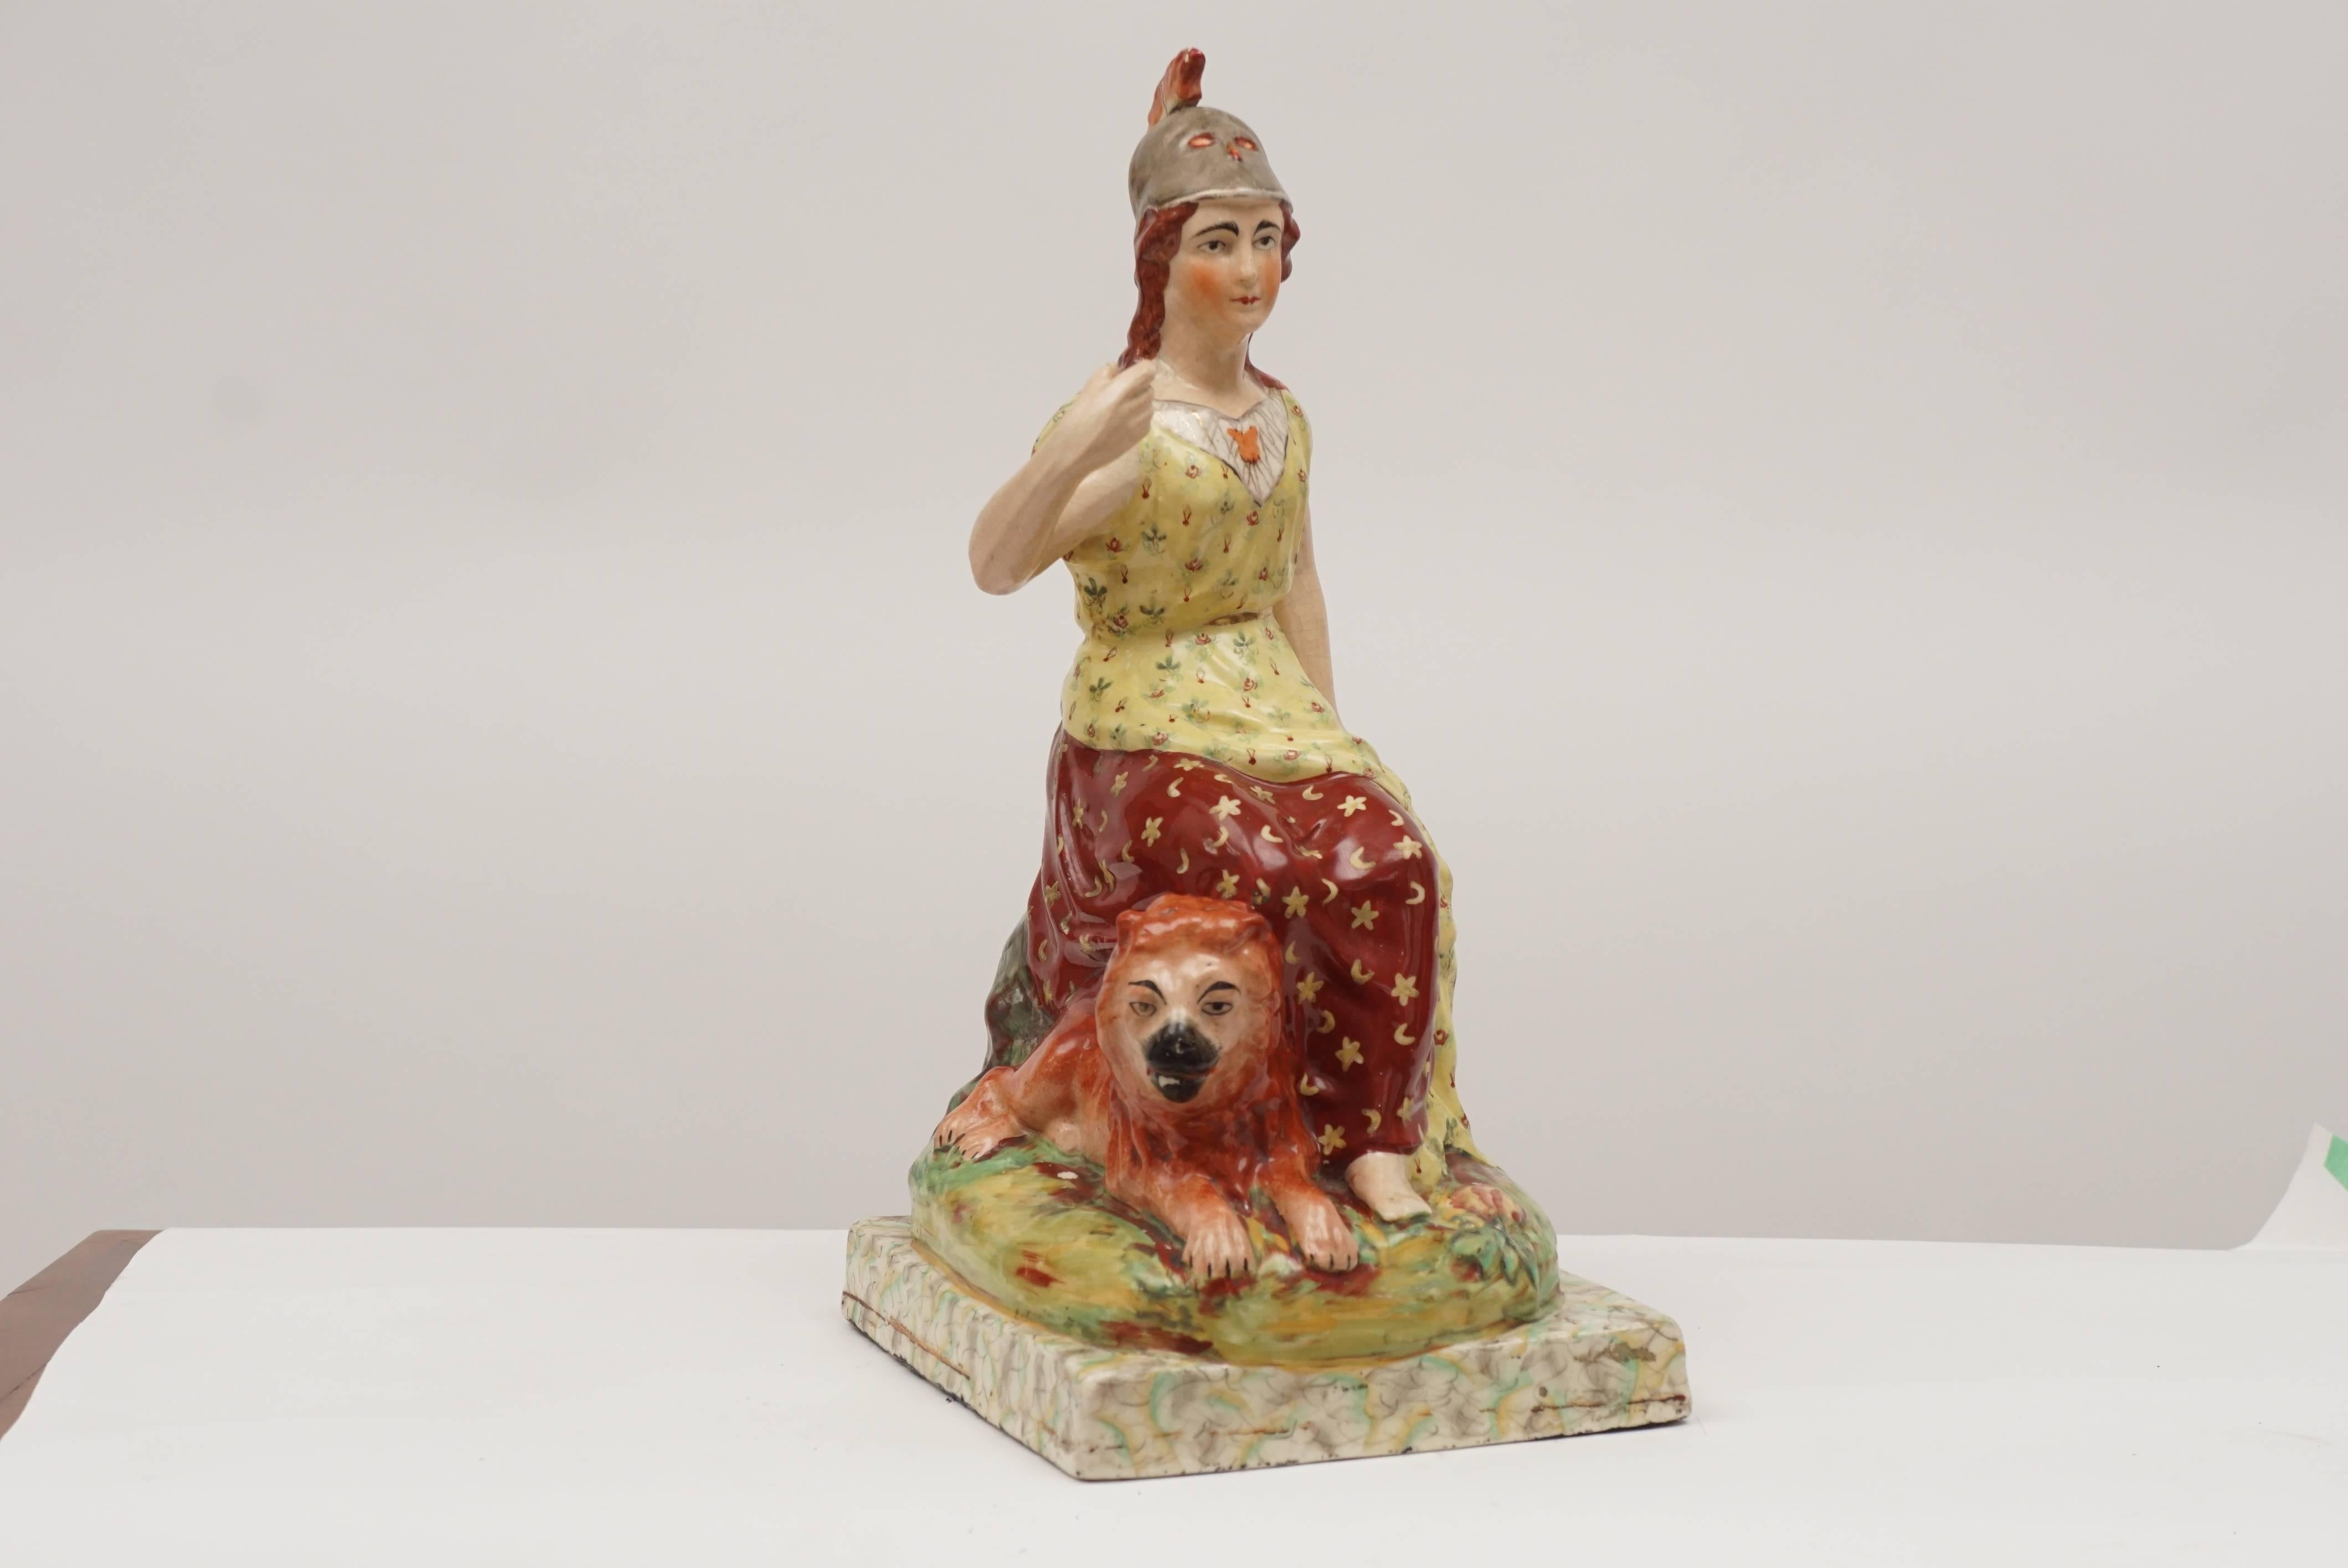 Allegorical Staffordshire pottery figure of a seated Britannia wearing a yellow and red dress. Imposing figure seated with her lion, circa 1820. Her shield is by her left hand. There is a repair to the tail end of her helmet. Overall she is quite is